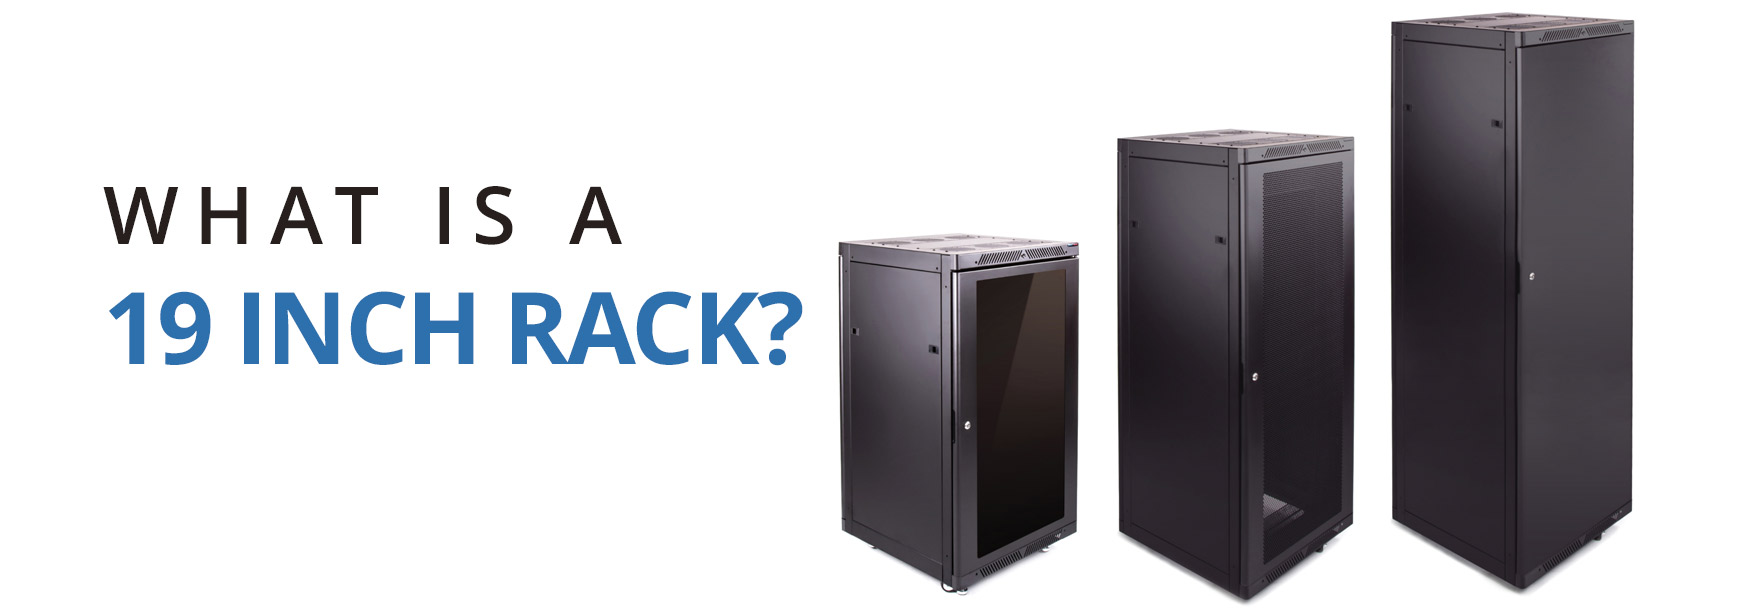 What is a 19 inch rack?